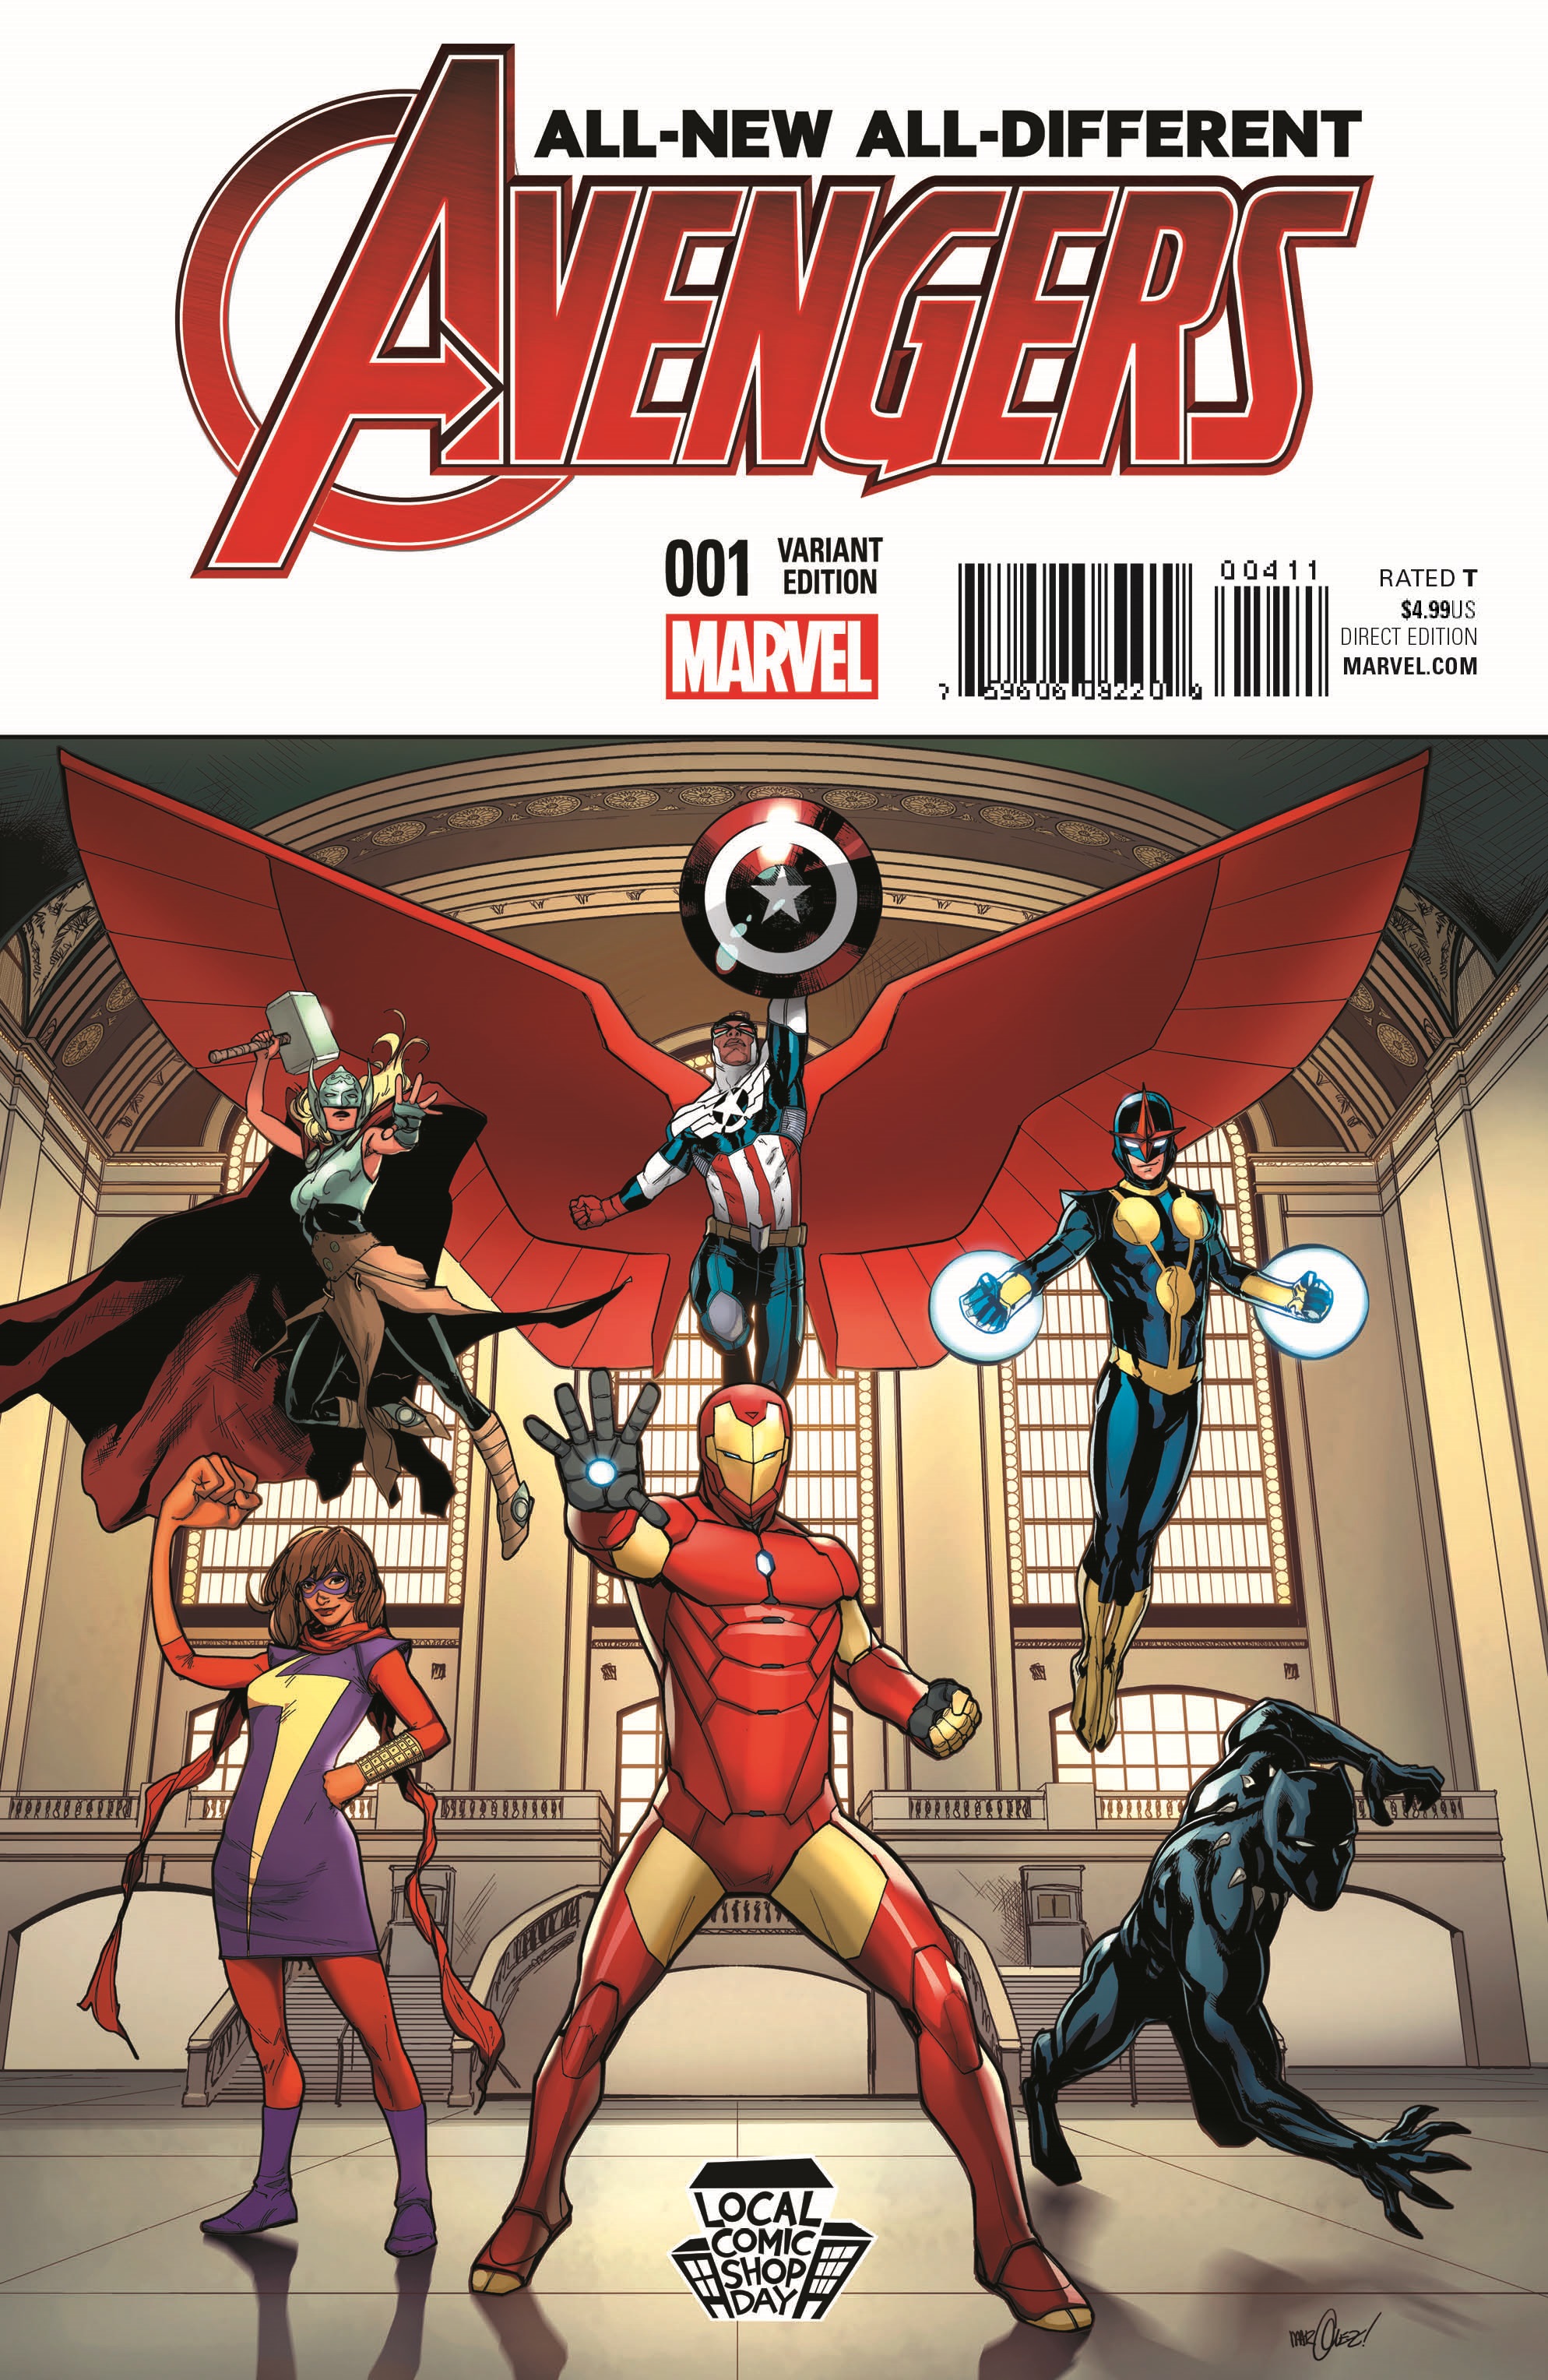 Local Comic Shop Day 2015 All New All Different Avengers #1 Marquez Variant #1